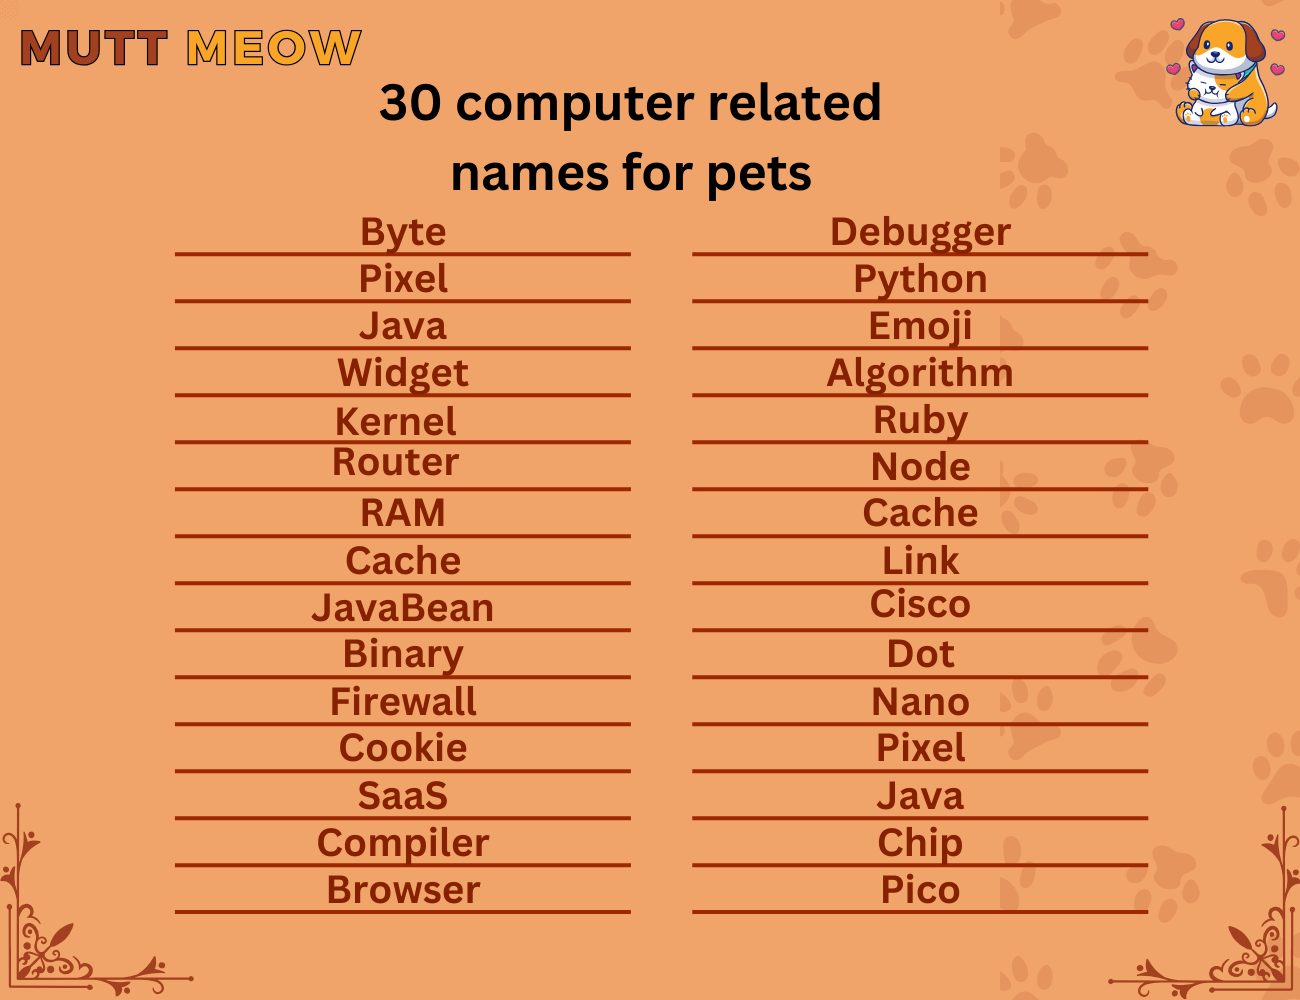 30 computer related names for pets